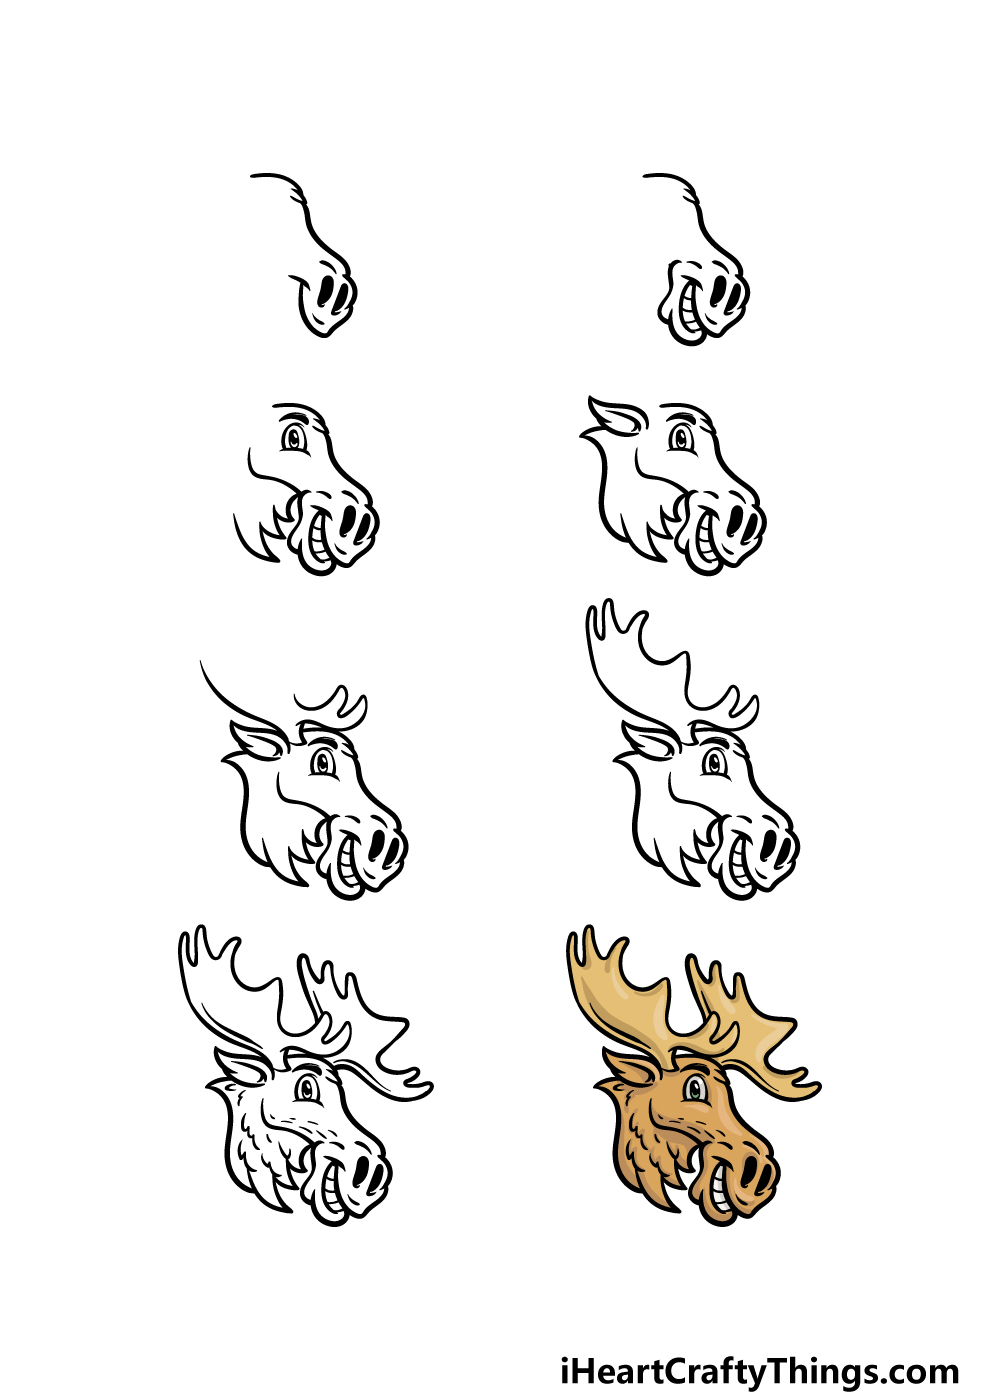 how to draw a cartoon moose in 8 steps